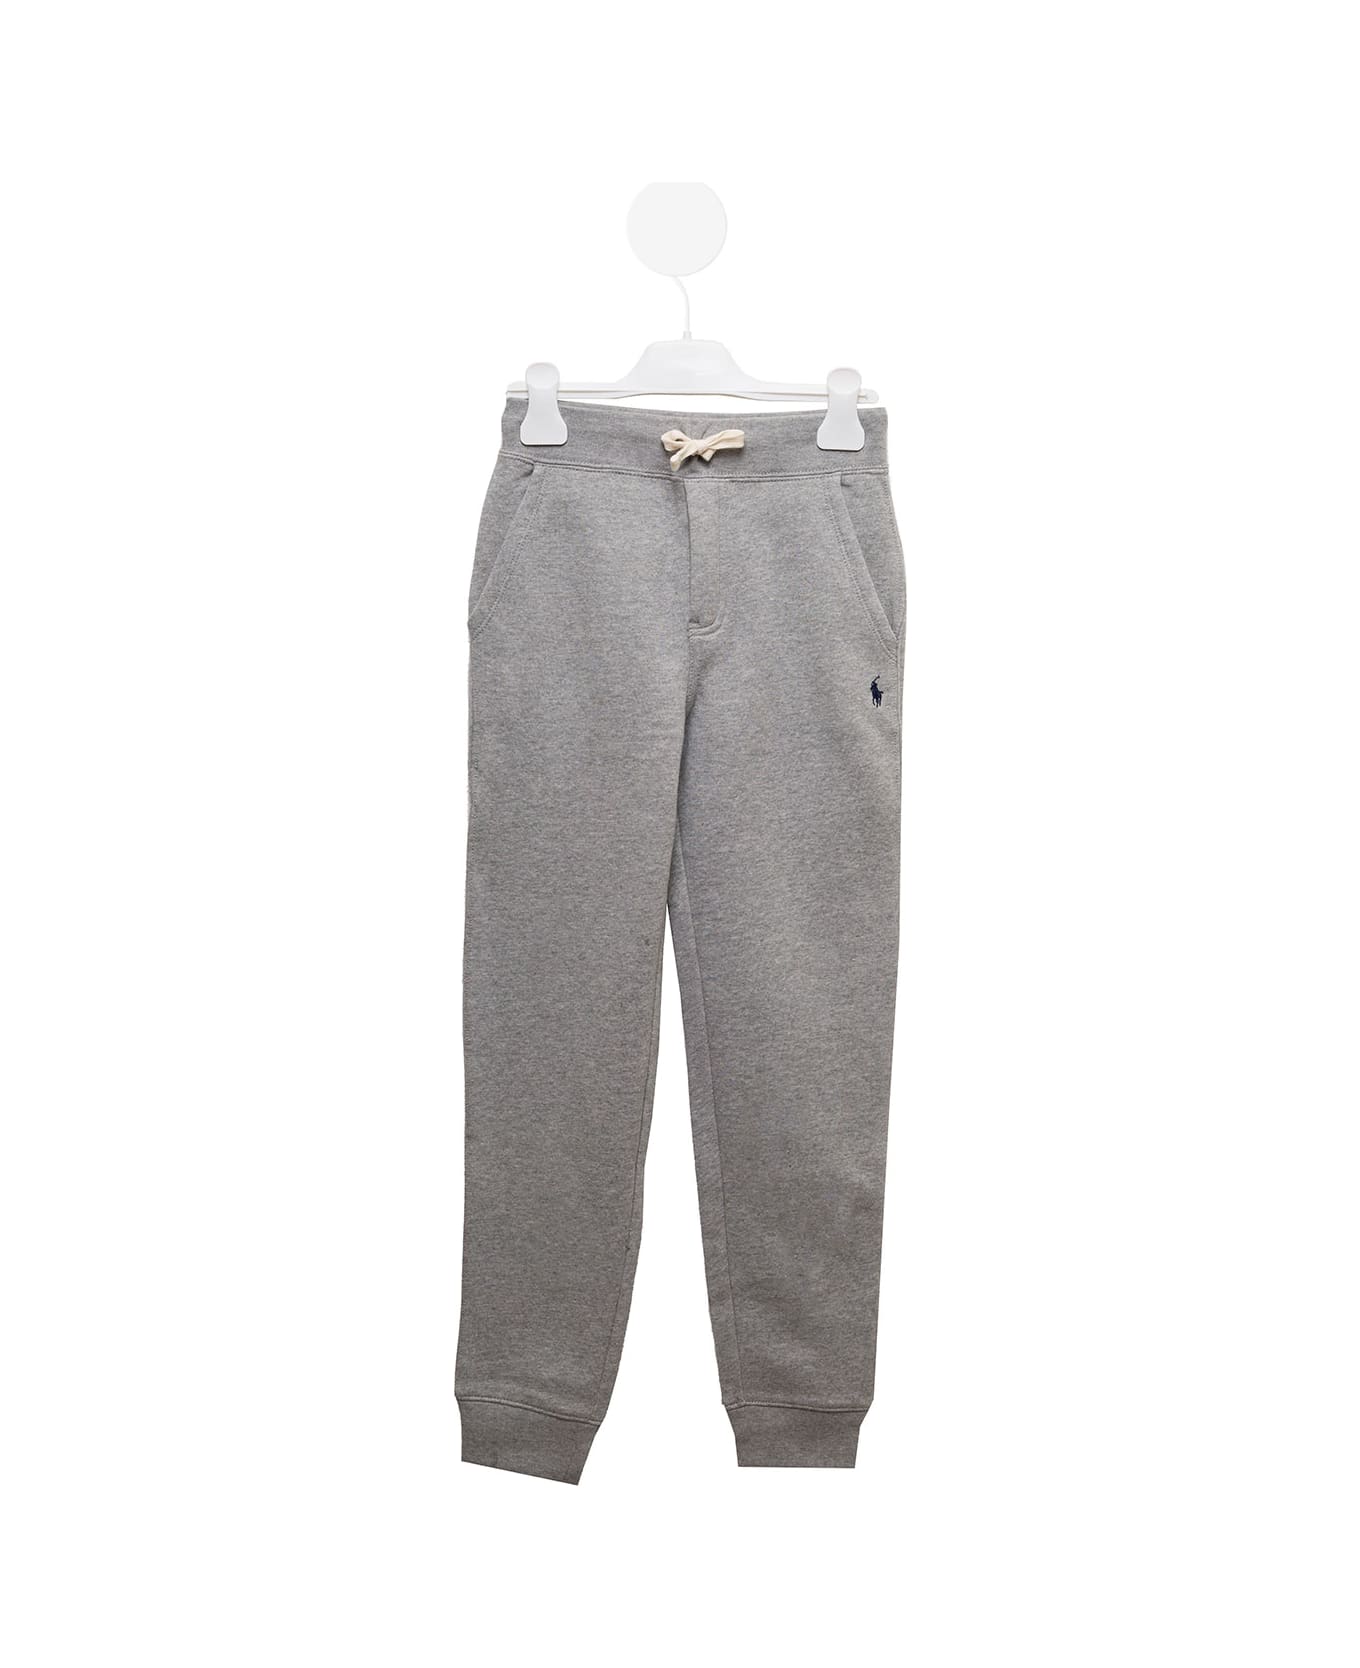 Polo Ralph Lauren Grey Jogger Pants With Logo Embroidery And Drawstring In Cotton Blend Boy - Grey